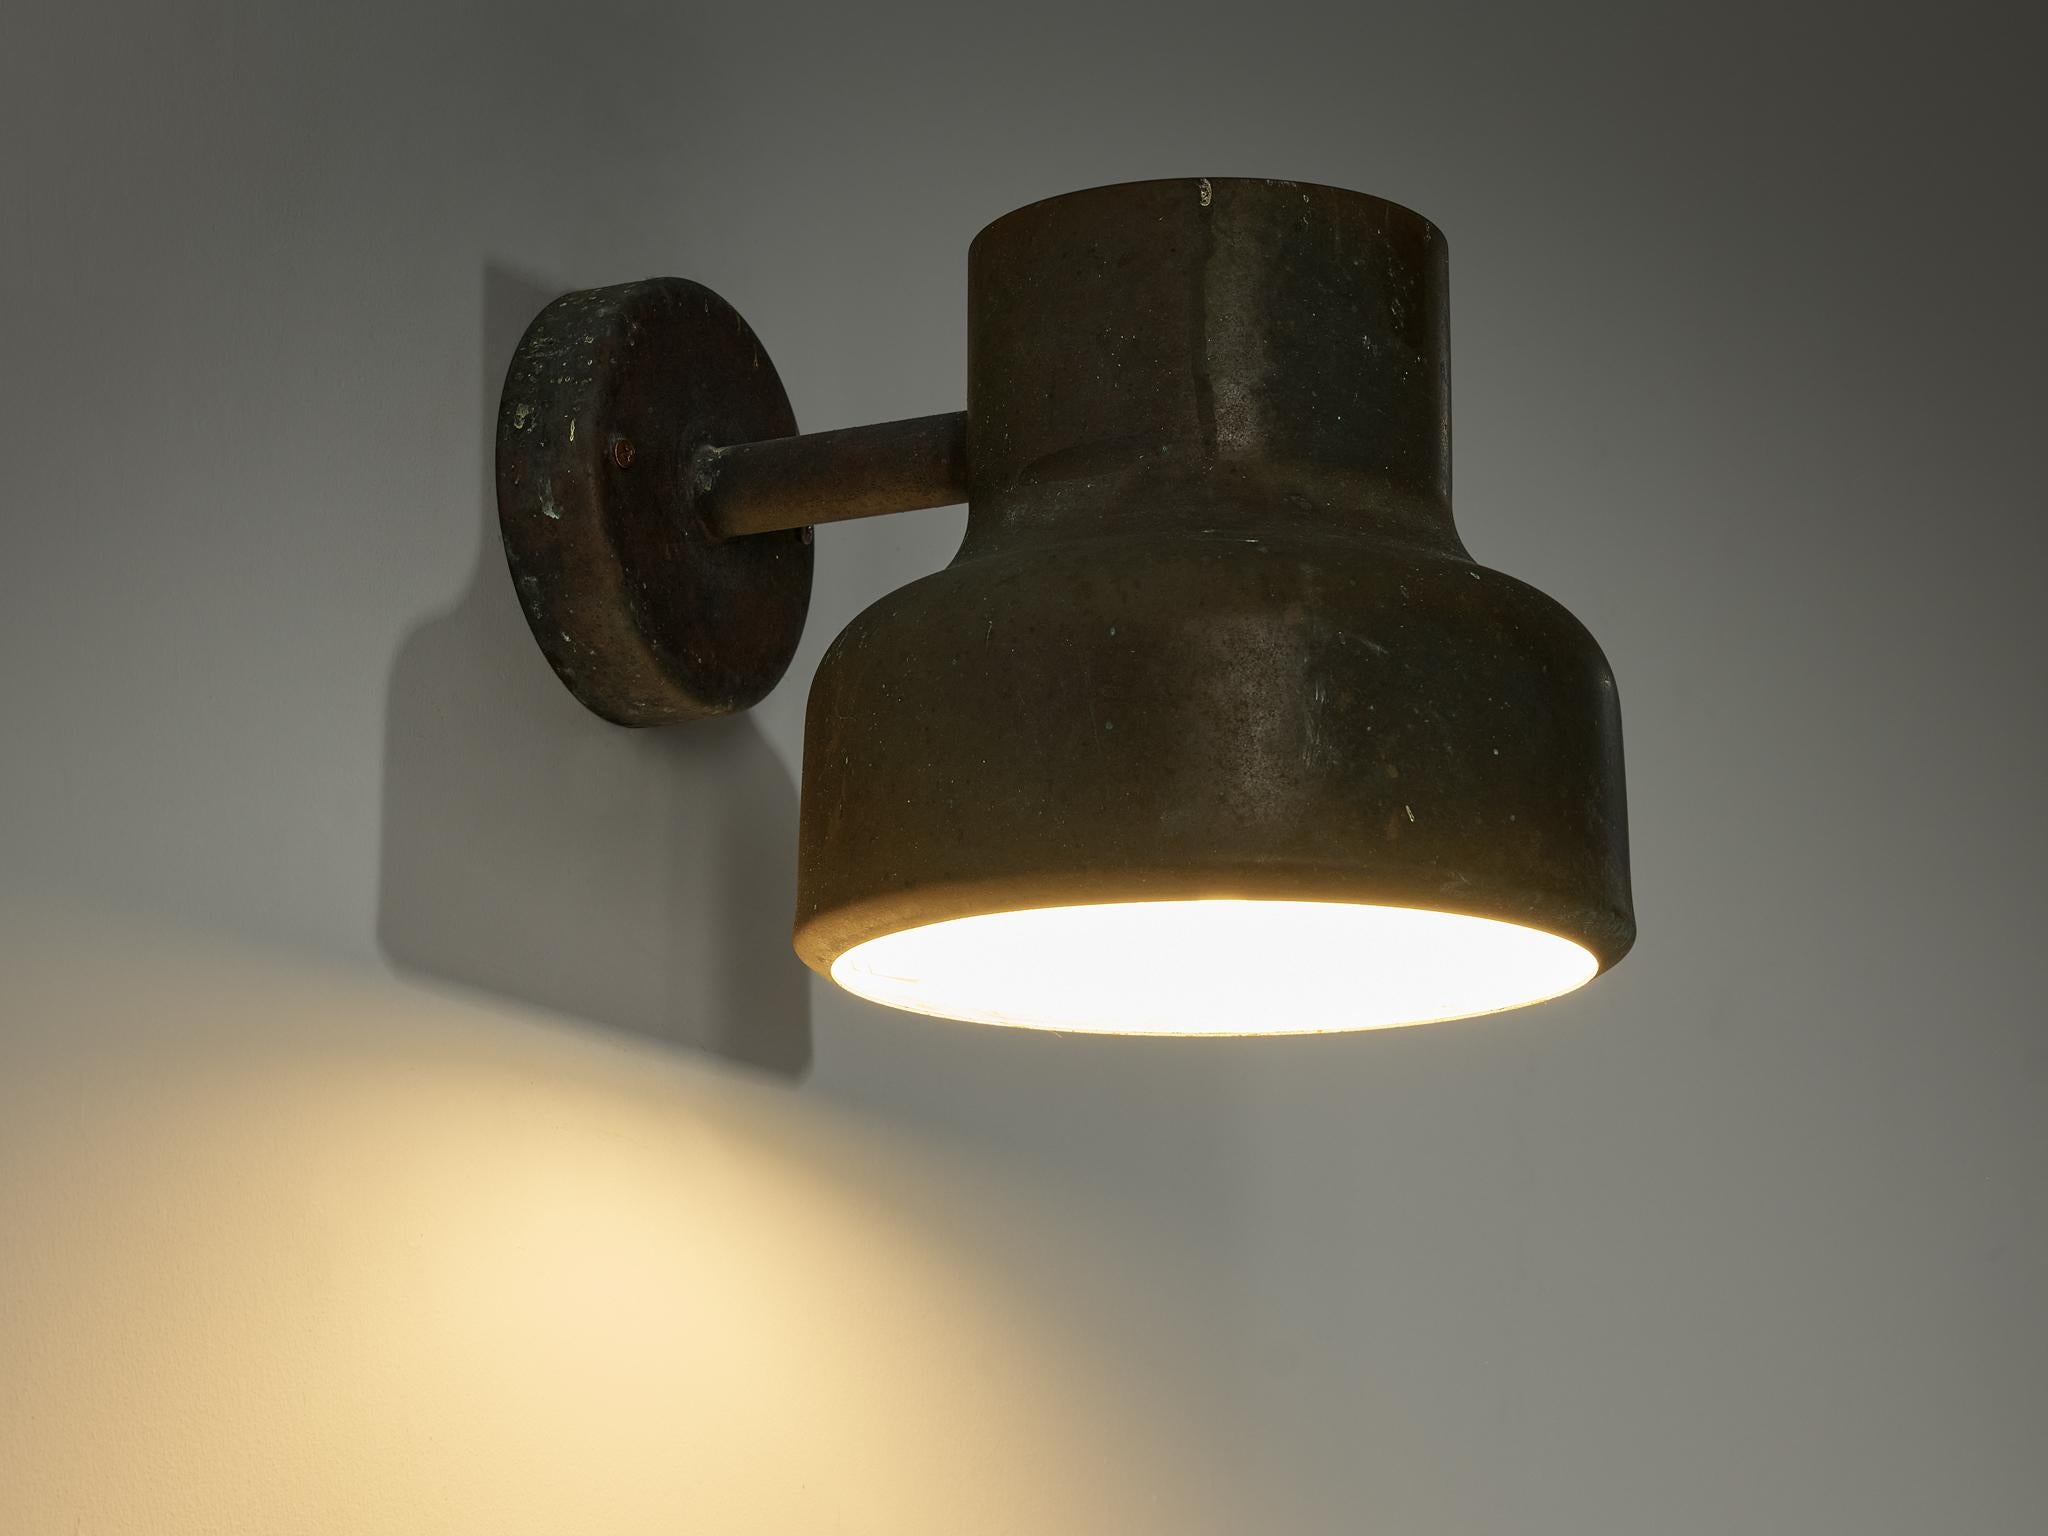 Anders Pehrson for Atelje Lyktan 'Bumling Utomhus' wall light, copper, Sweden, 1968.

This 'Bumling' wall lamp is designed by Anders Pehrson for Ateljé Lyktan. The curved lampshade is secured to the wall by means of a round plate. Over time, the